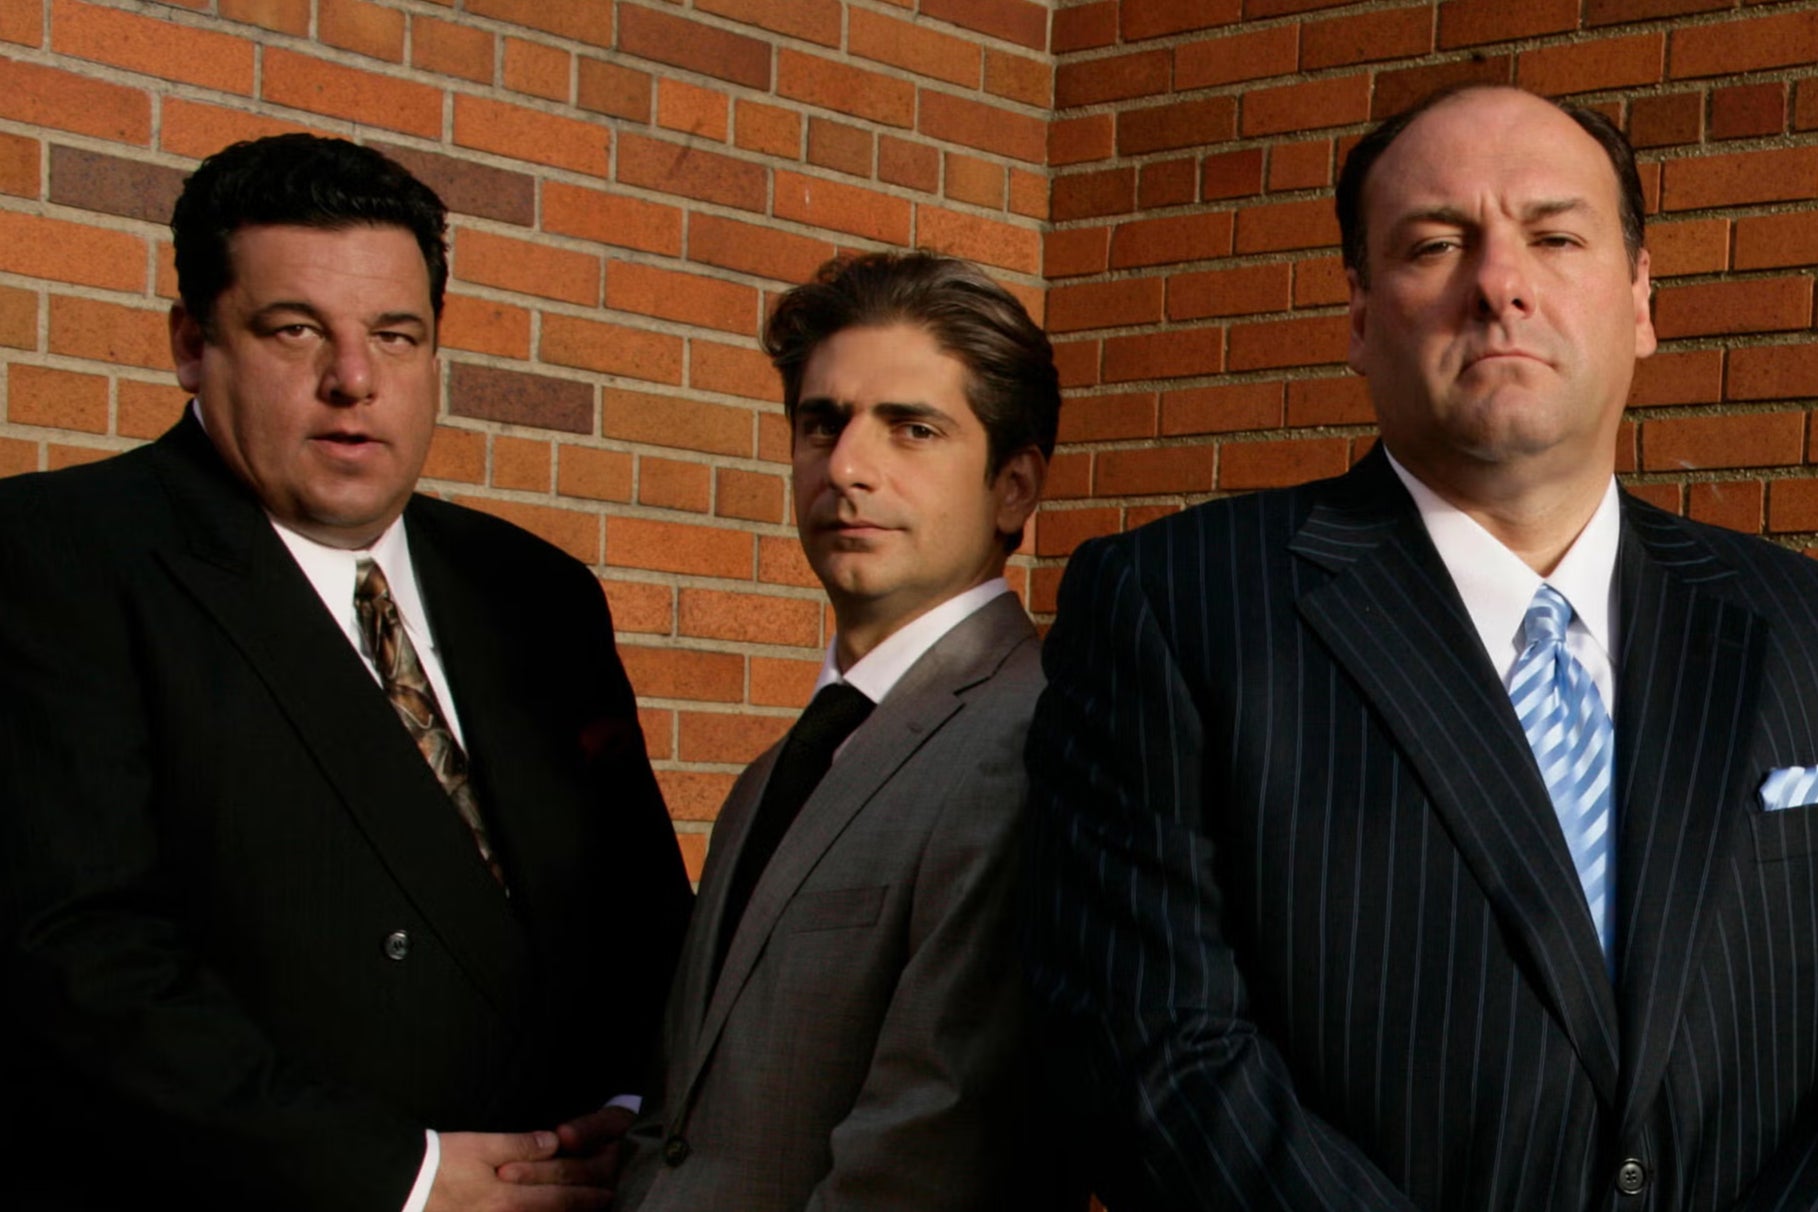 ‘It’s about the emptiness of the American Dream’: Steve Schirripa, Michael Imperioli and James Gandolfini in ‘The Sopranos'